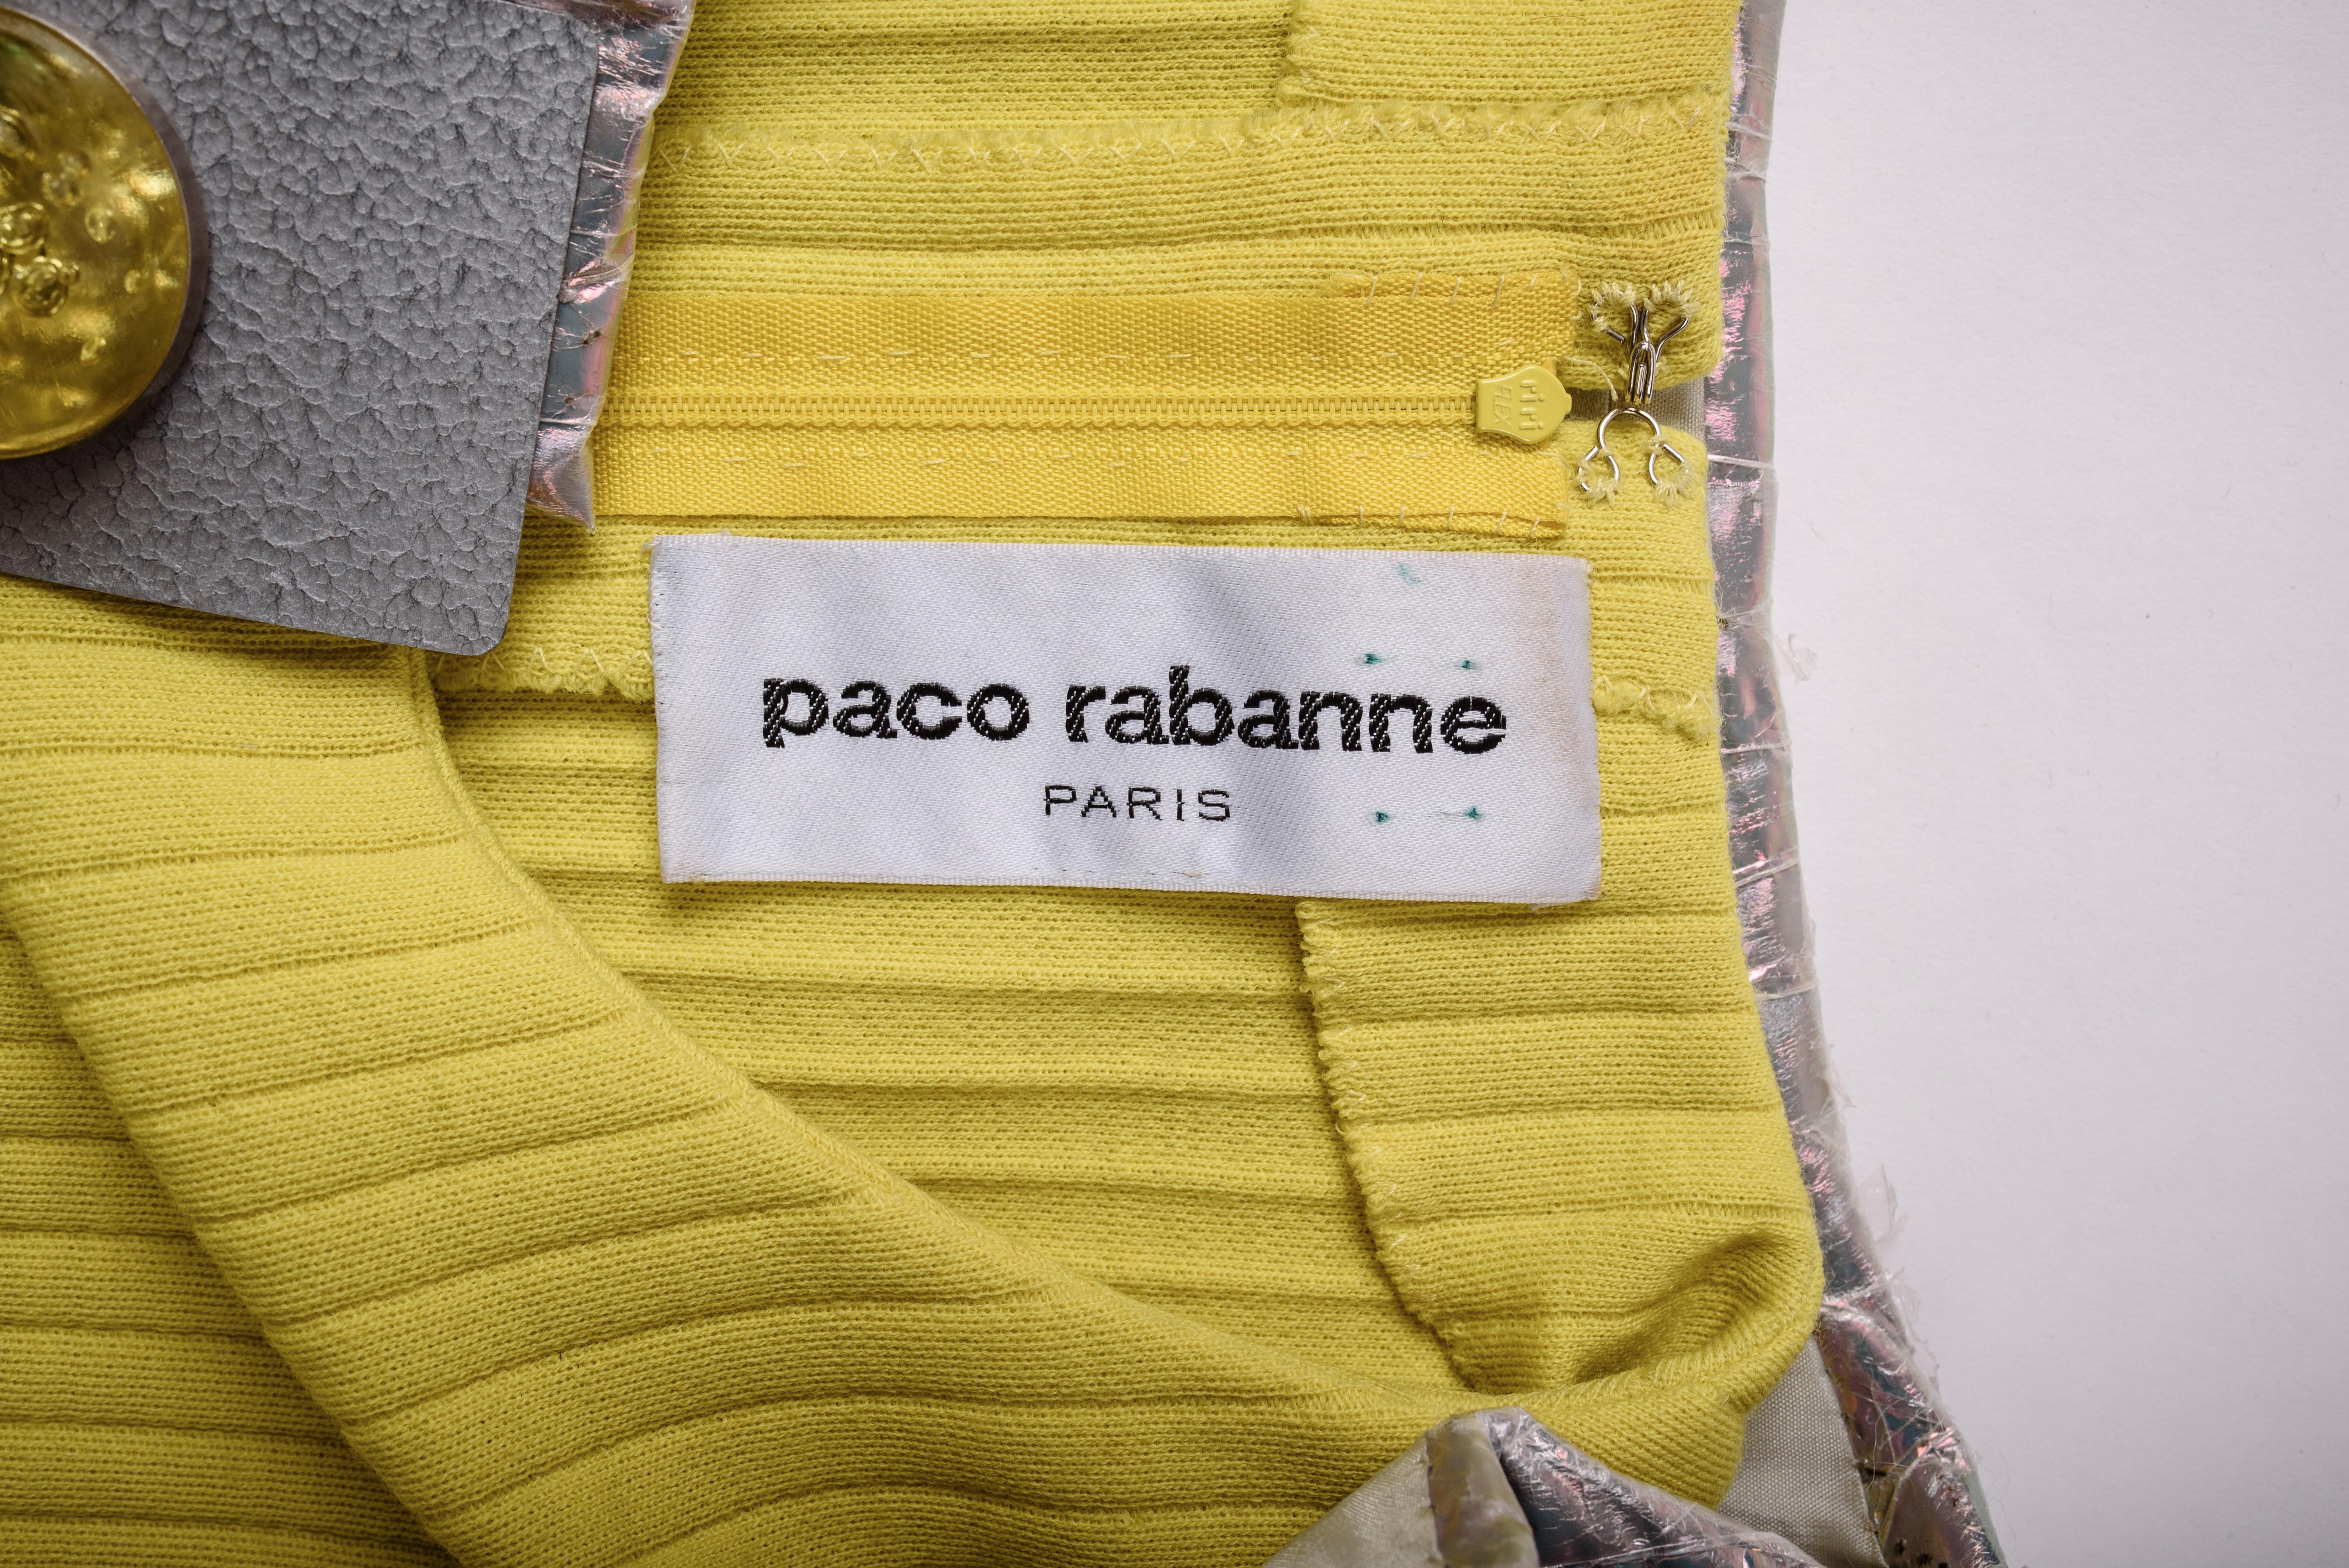 Spring Summer 1991 Collection

France

Modernist ensemble from Paco Rabanne's Haute Couture show. Composed of a pair of Bermuda shorts, a tunic-dress made of stretchy ribbed knitwear in lemon-yellow and a bolero with quilted fins in iridescent